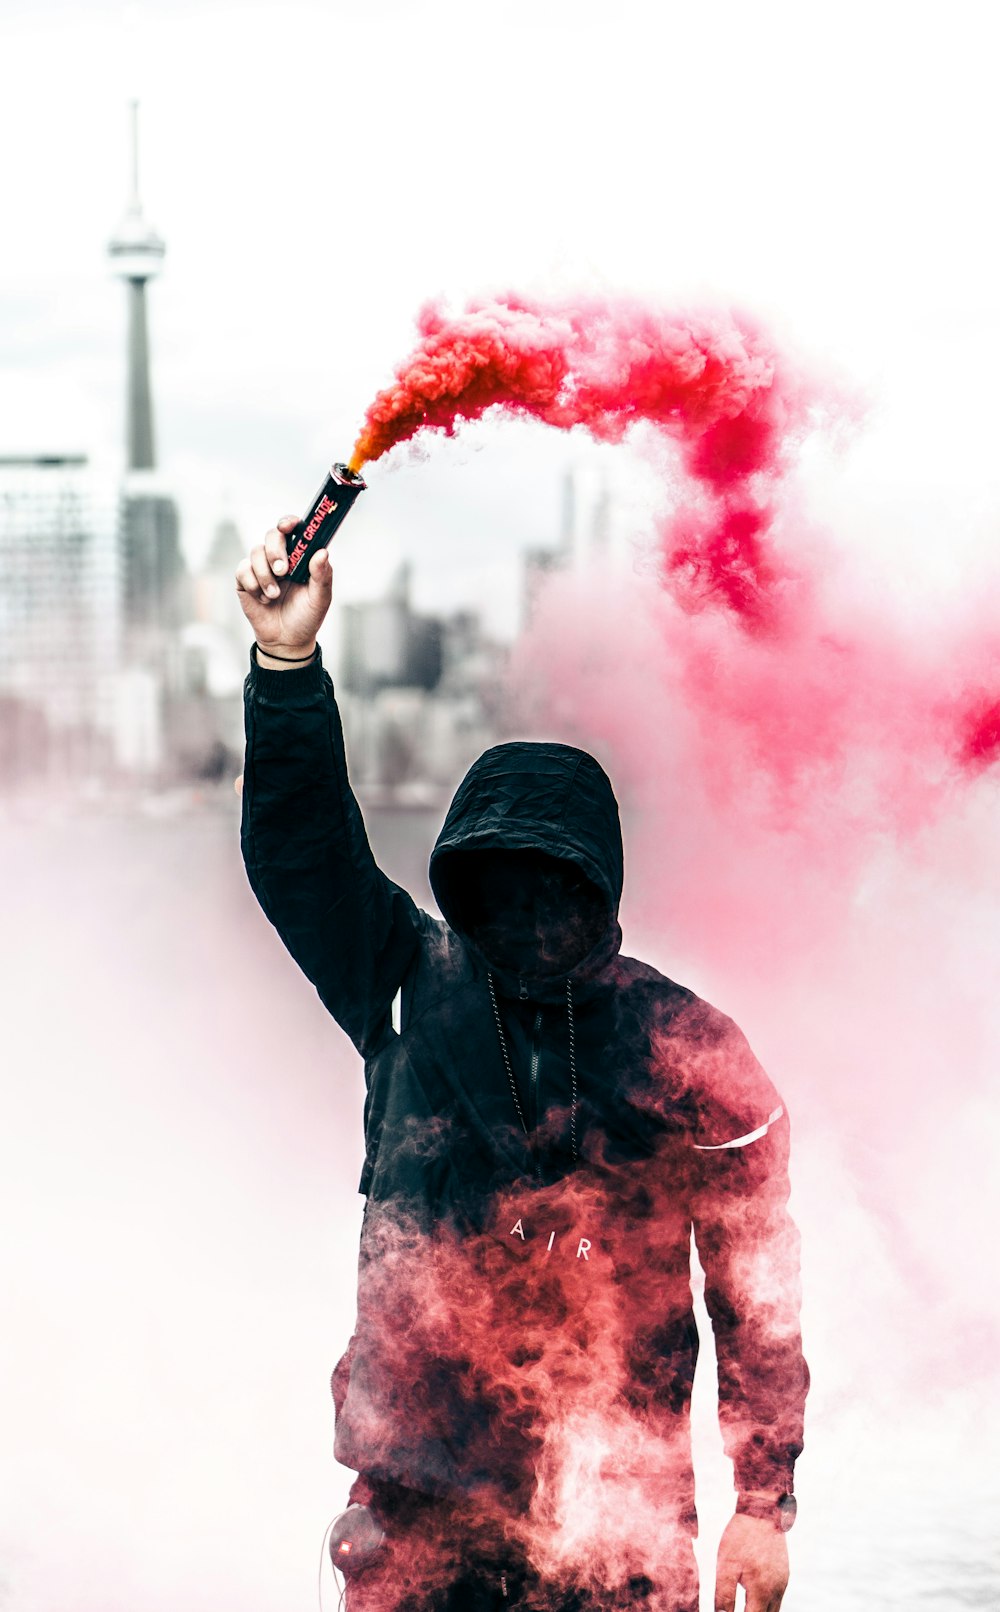 A person in a black hoodie with obscured face holds up a pink smoke grenade